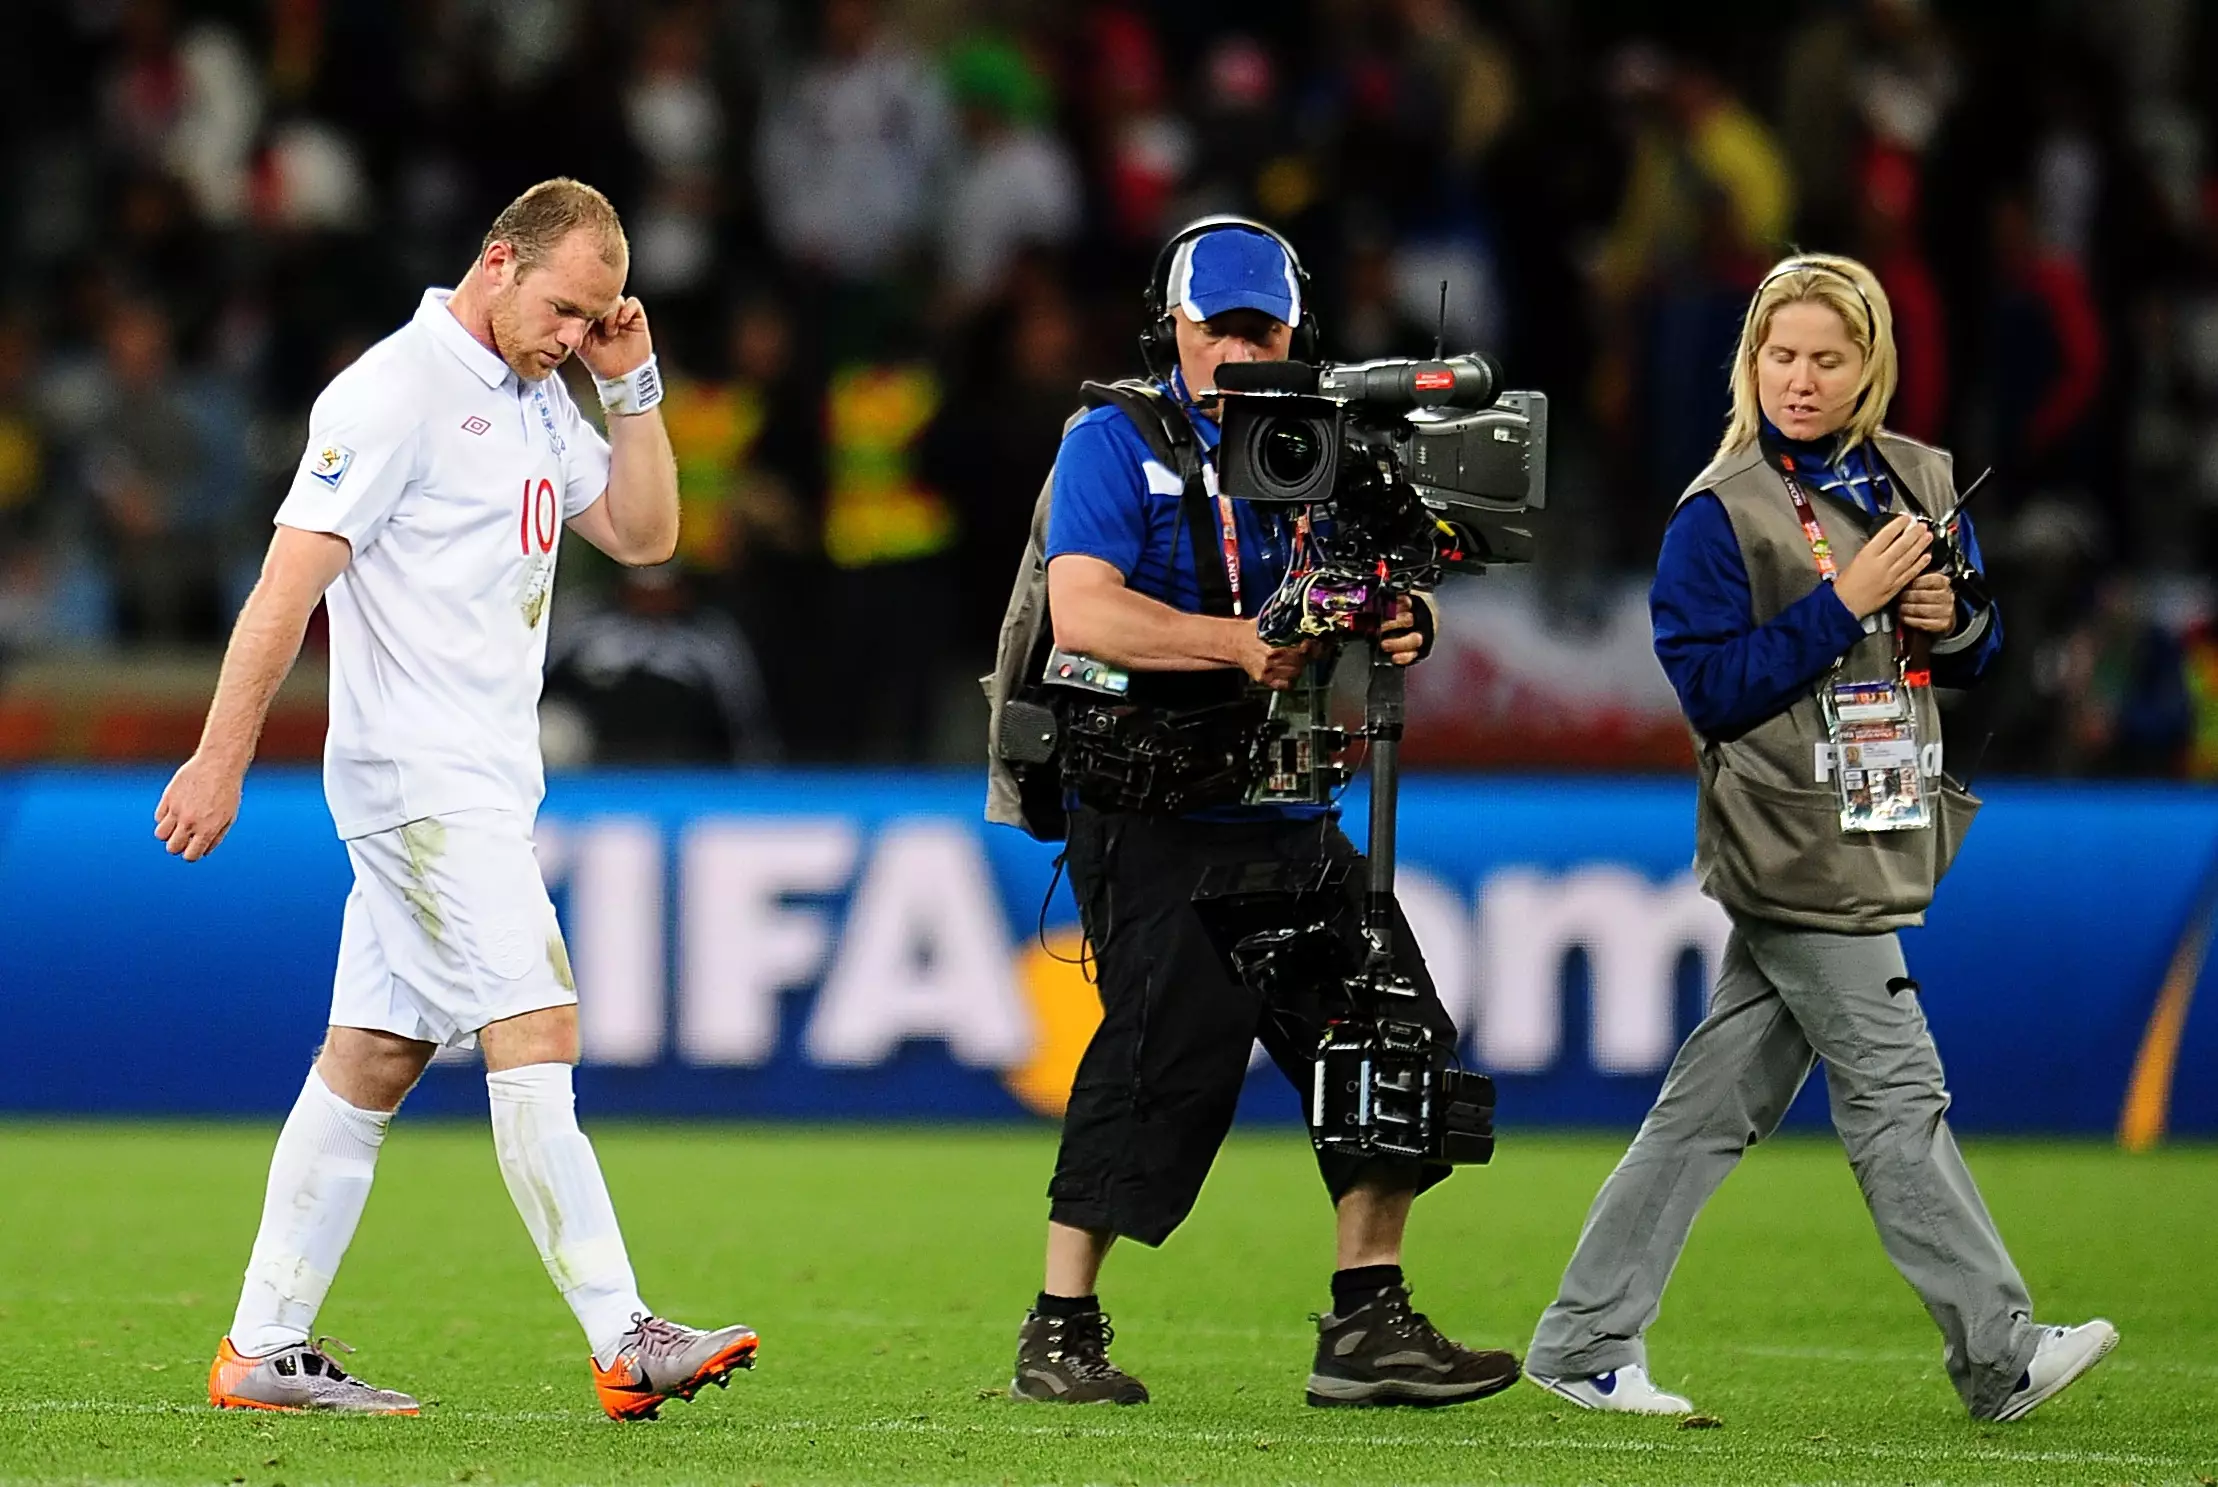 Rooney's had plenty of controversial moments in his career. Image: PA Images